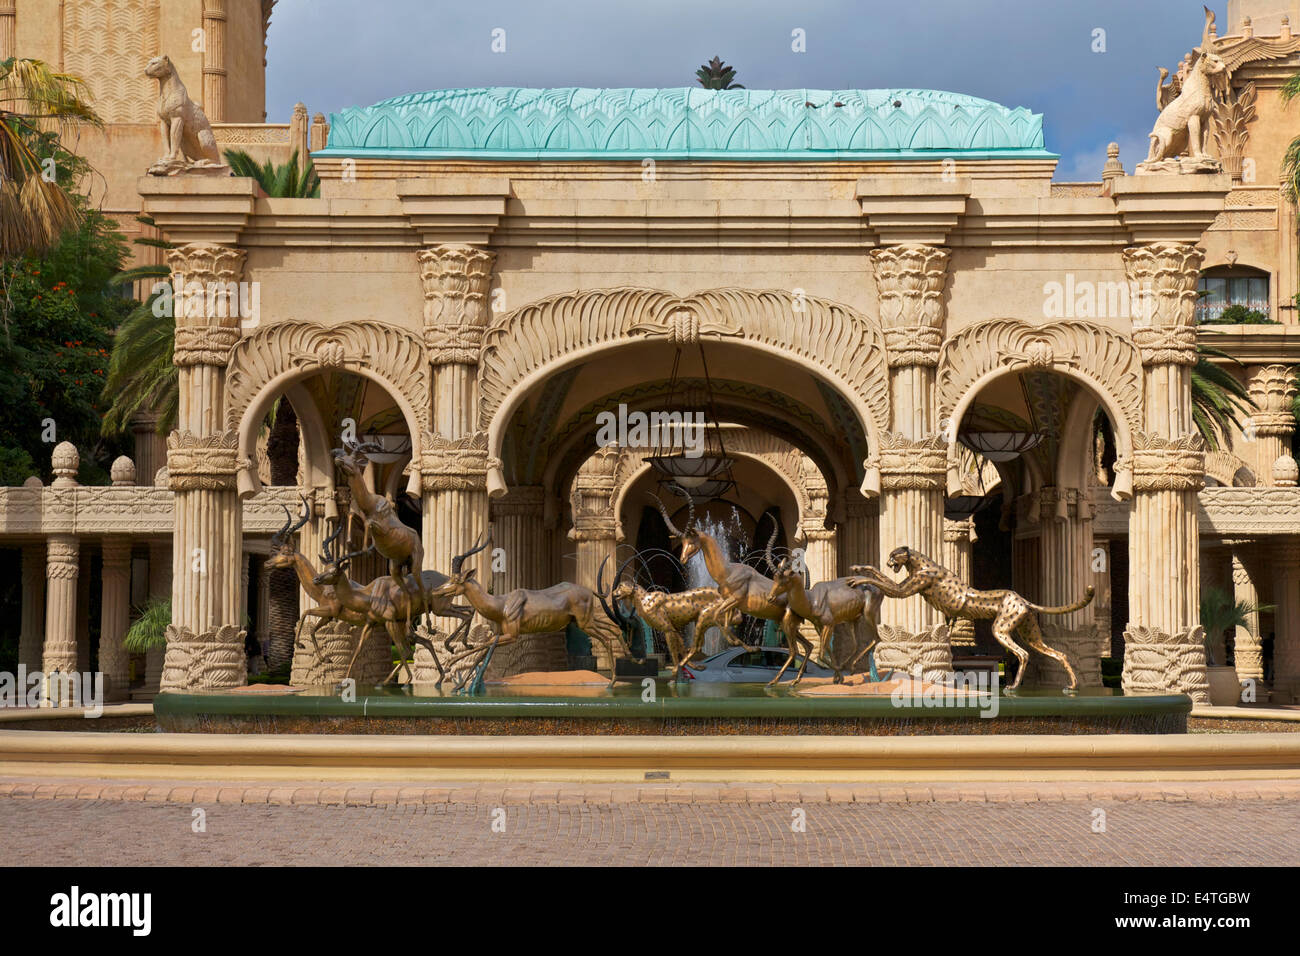 SUN CITY, SOUTH AFRICA - APRIL 21, 2010 :  Lost City or Sun City is a Luxury Hotel with a grand entrance and luxury palace. Stock Photo